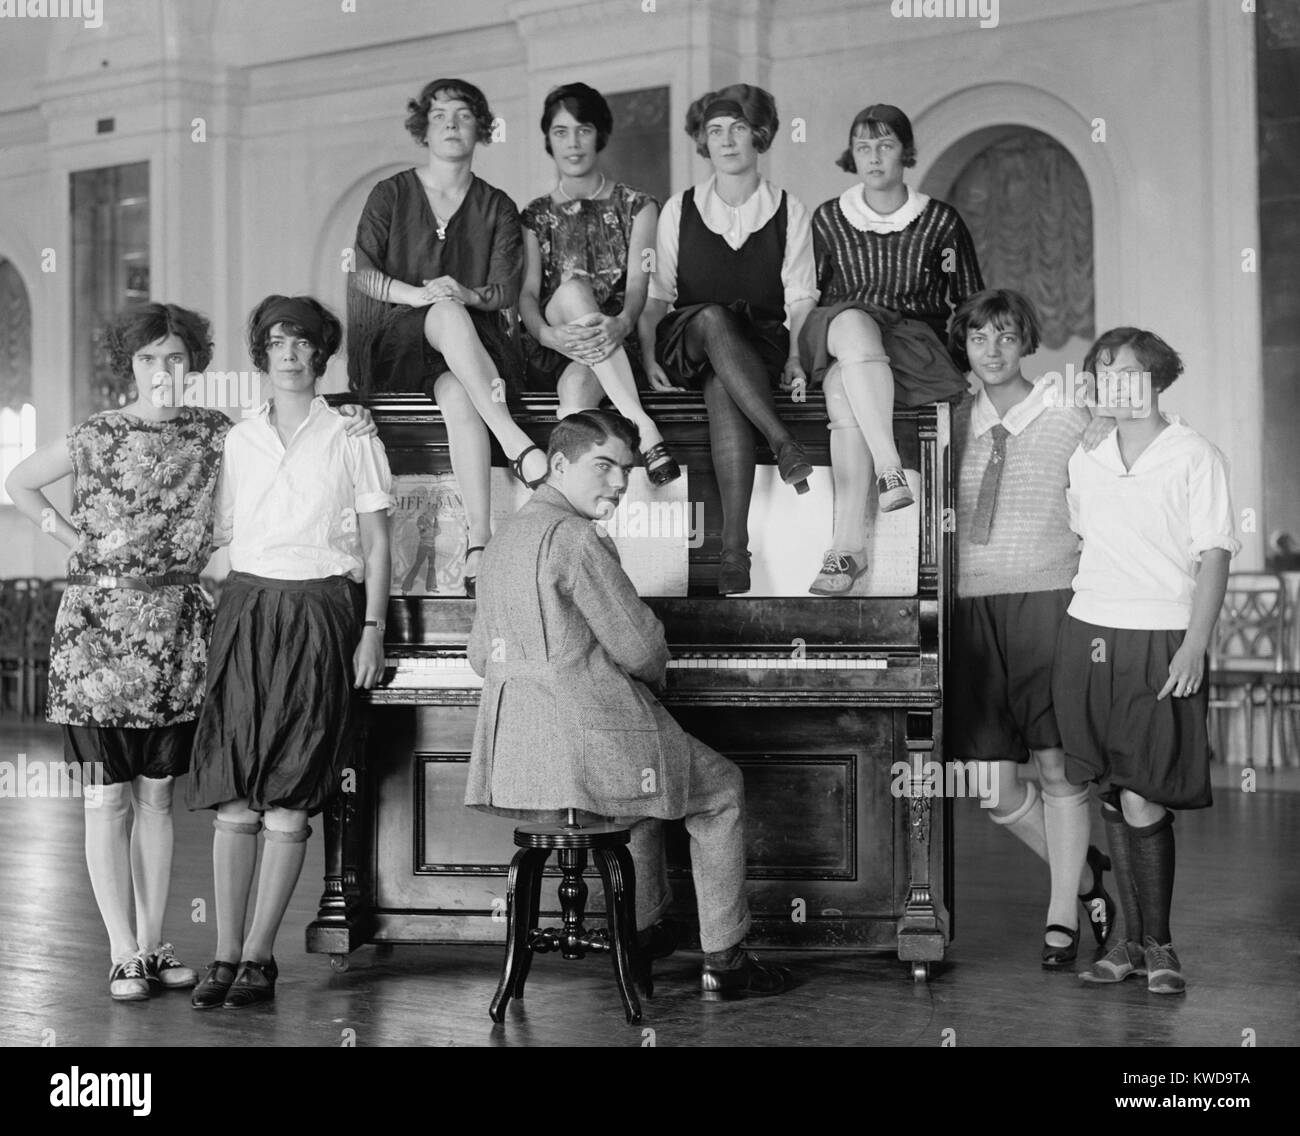 Group of young women described as 'Debutantes' wearing bloomers around a man at a piano. Oct 8, 1923. Washington, D.C. vicinity, (BSLOC_2015_17_209) Stock Photo